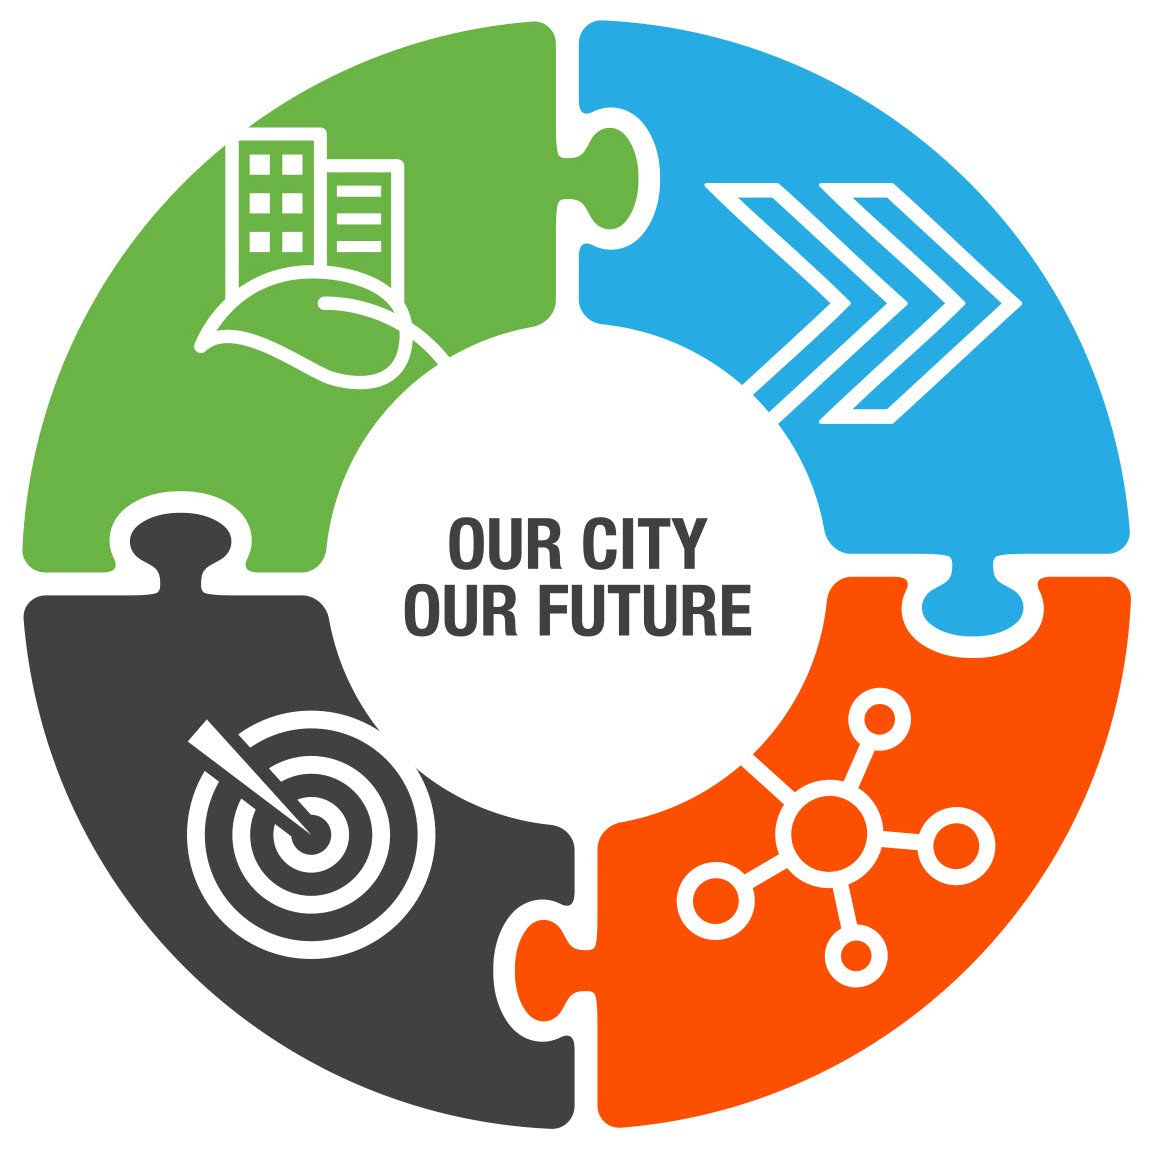 Strategic Plan diagram illustrating the four strategic directions - A City that Moves, Sustainability, Effective and Connected